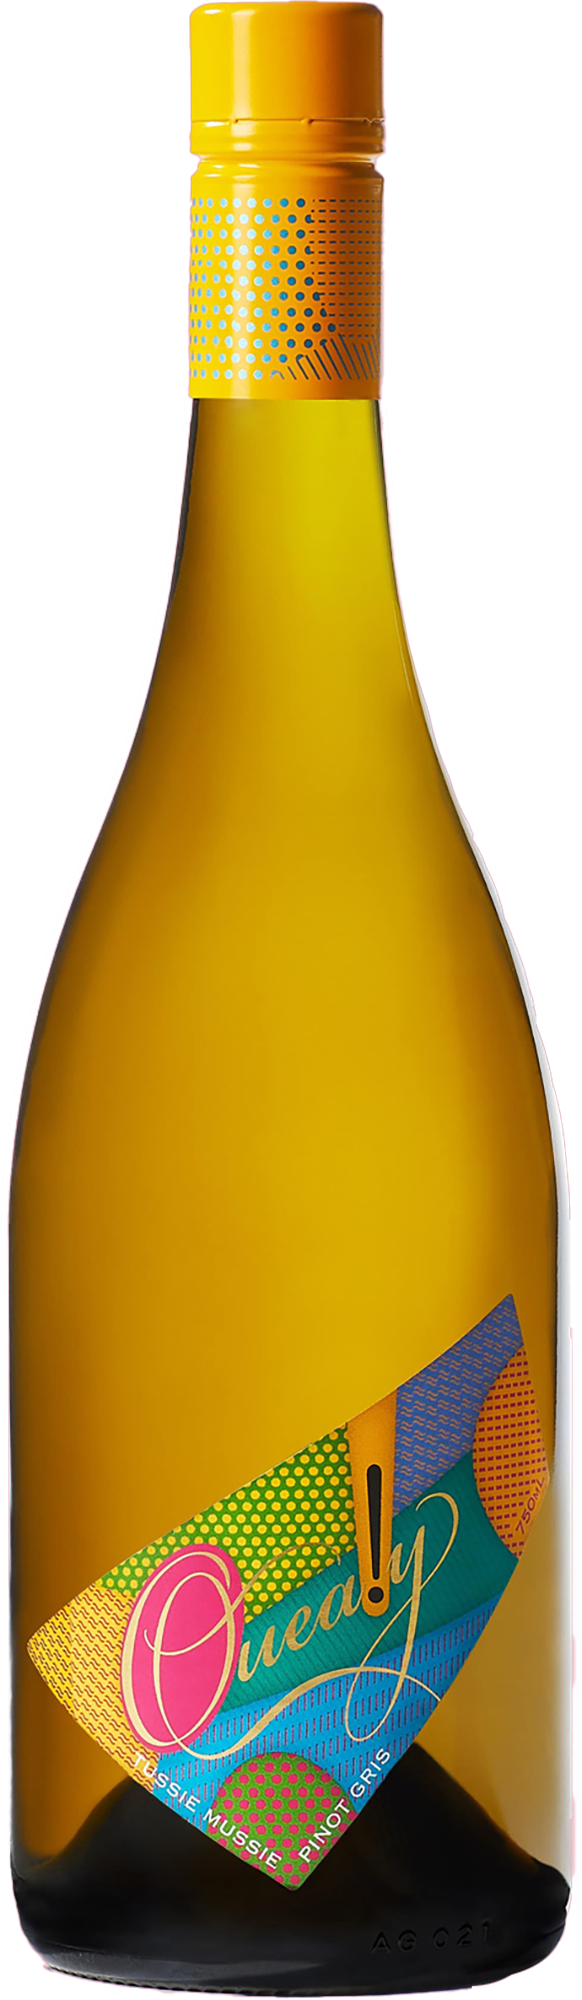 Quealy Tussie Mussie Pinot Gris 2022